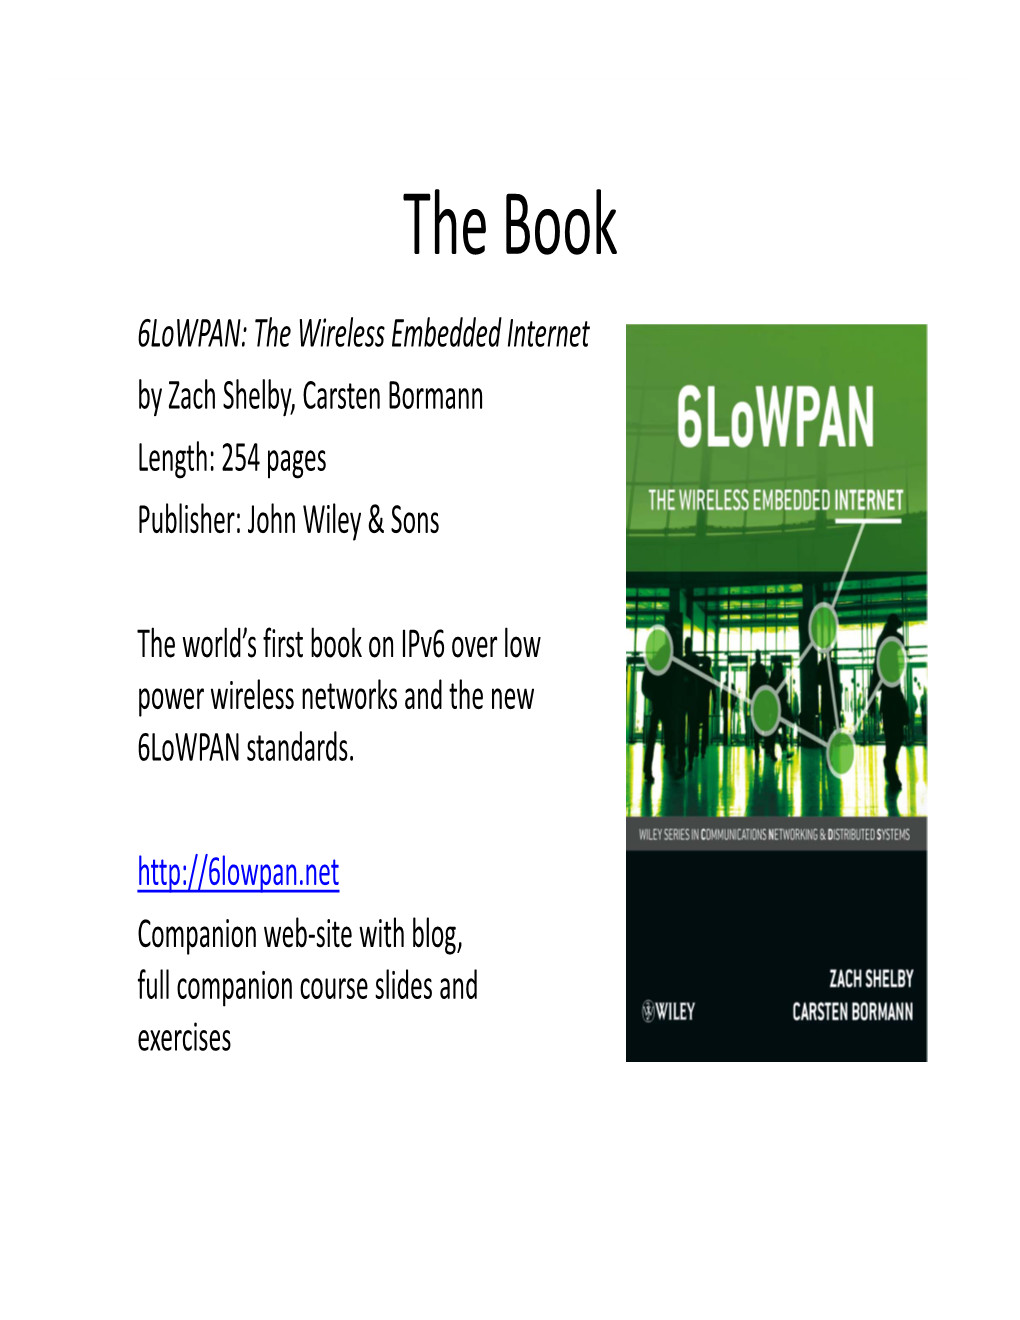 6Lowpan: the Wireless Embedded Internet by Zach Shelby, Carsten Bormann Length: 254 Pages Publisher: John Wiley & Sons